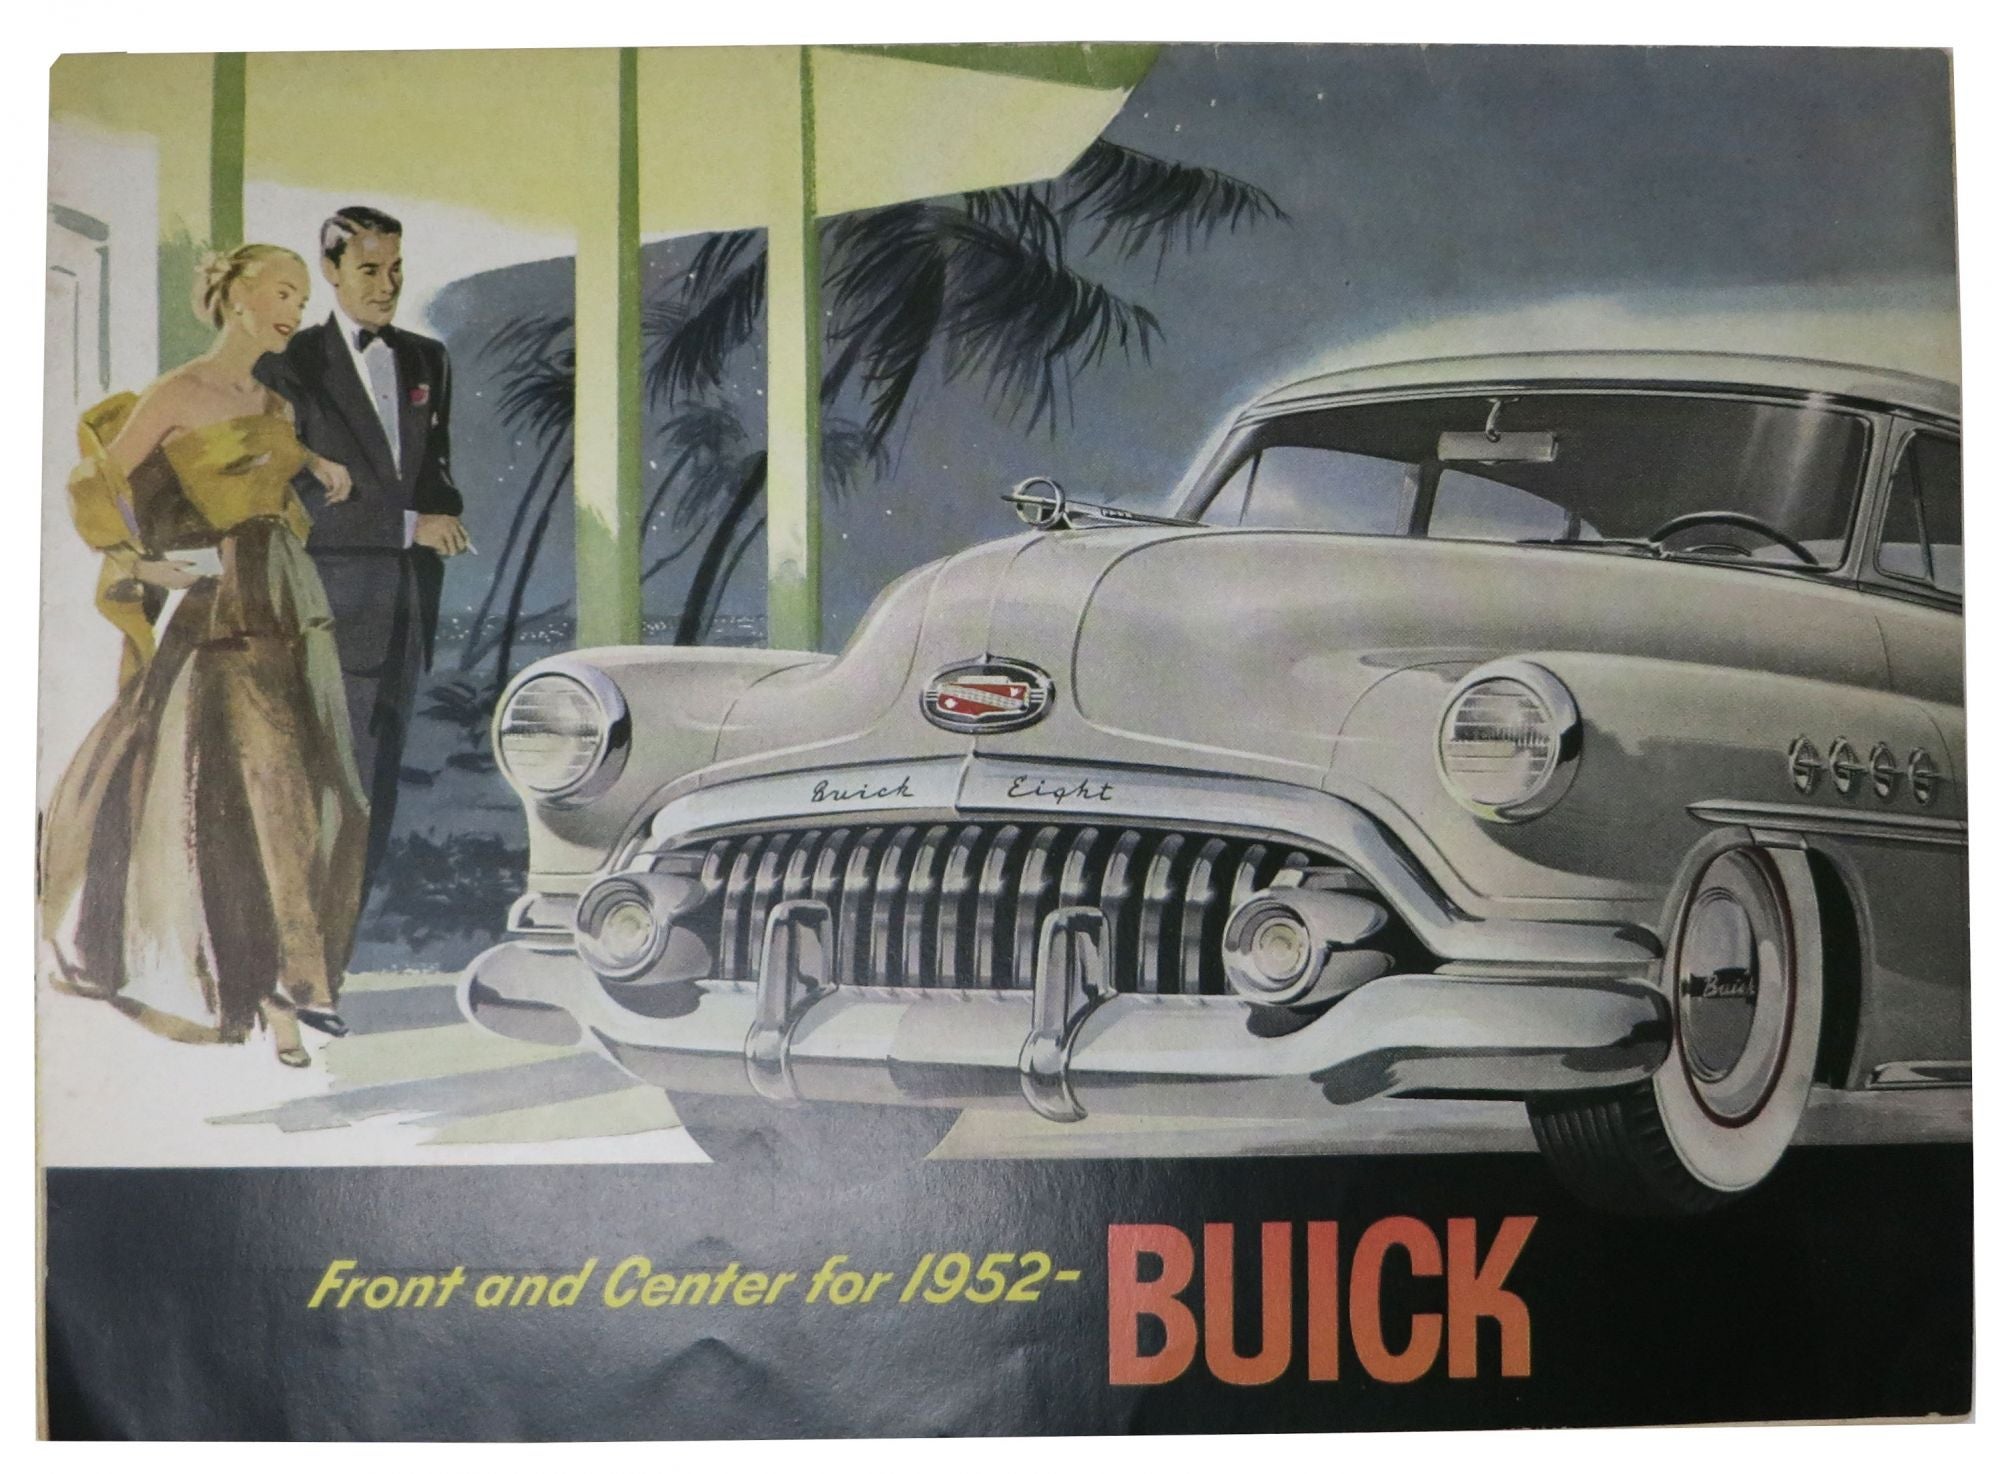 [Automotive Promotional Brochure] - FRONT And CENTER For 1952-- BUICK